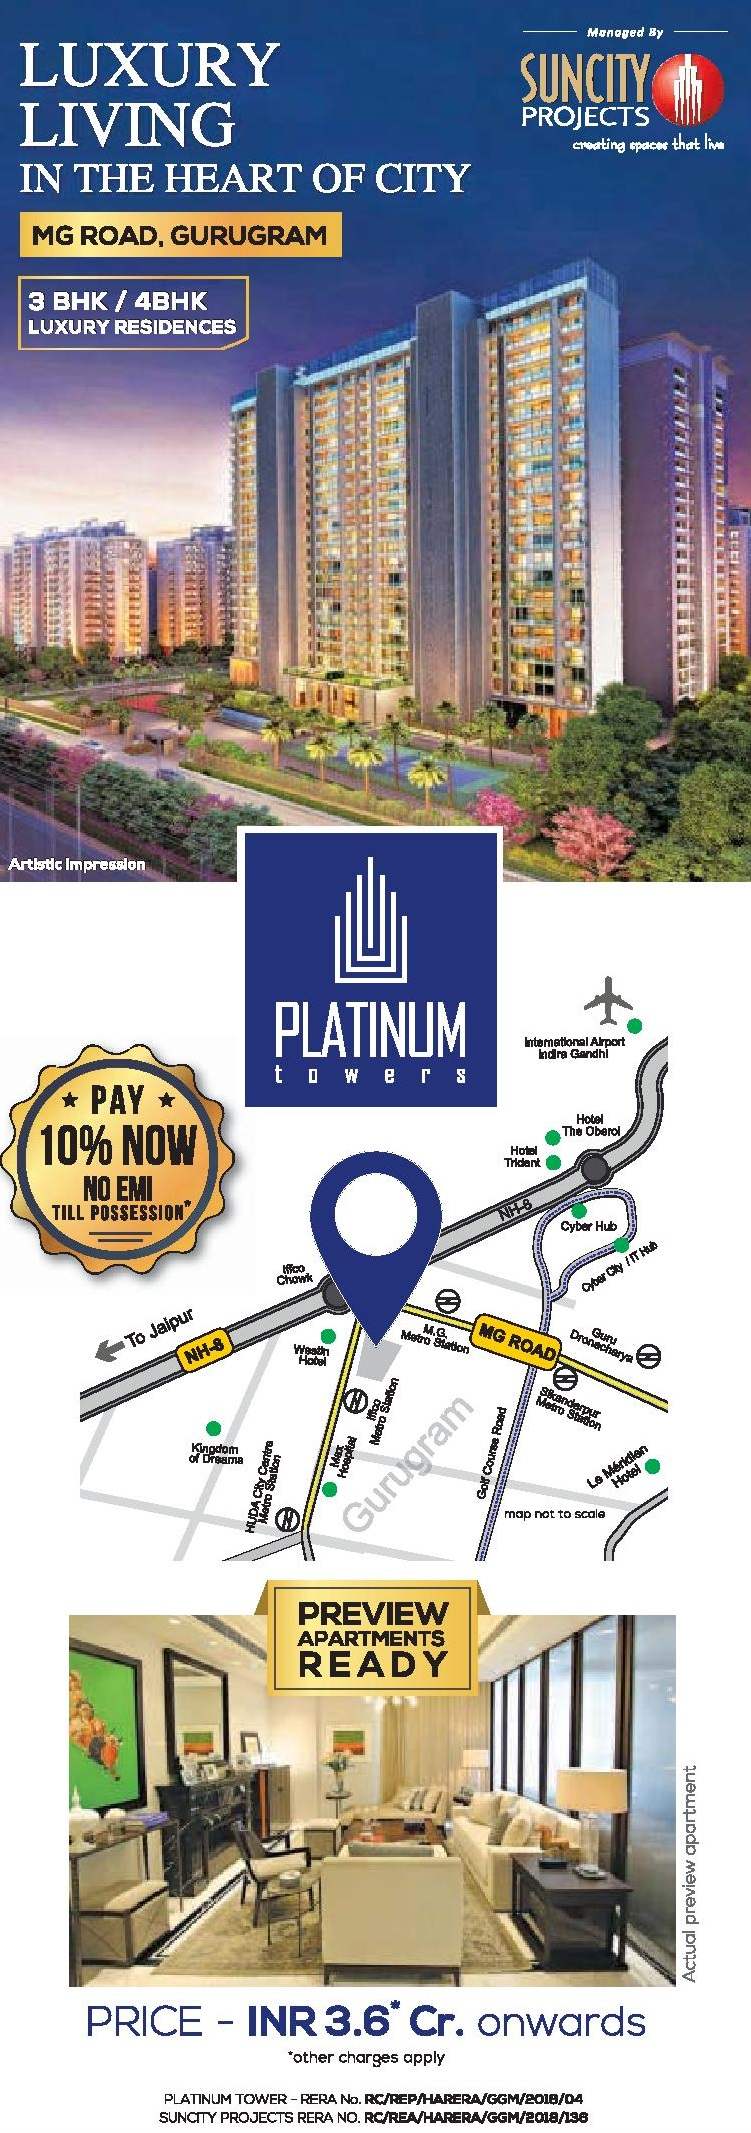 Pay 10% now & no EMI till possession at Suncity Platinum Towers in MG Road, Gurgaon